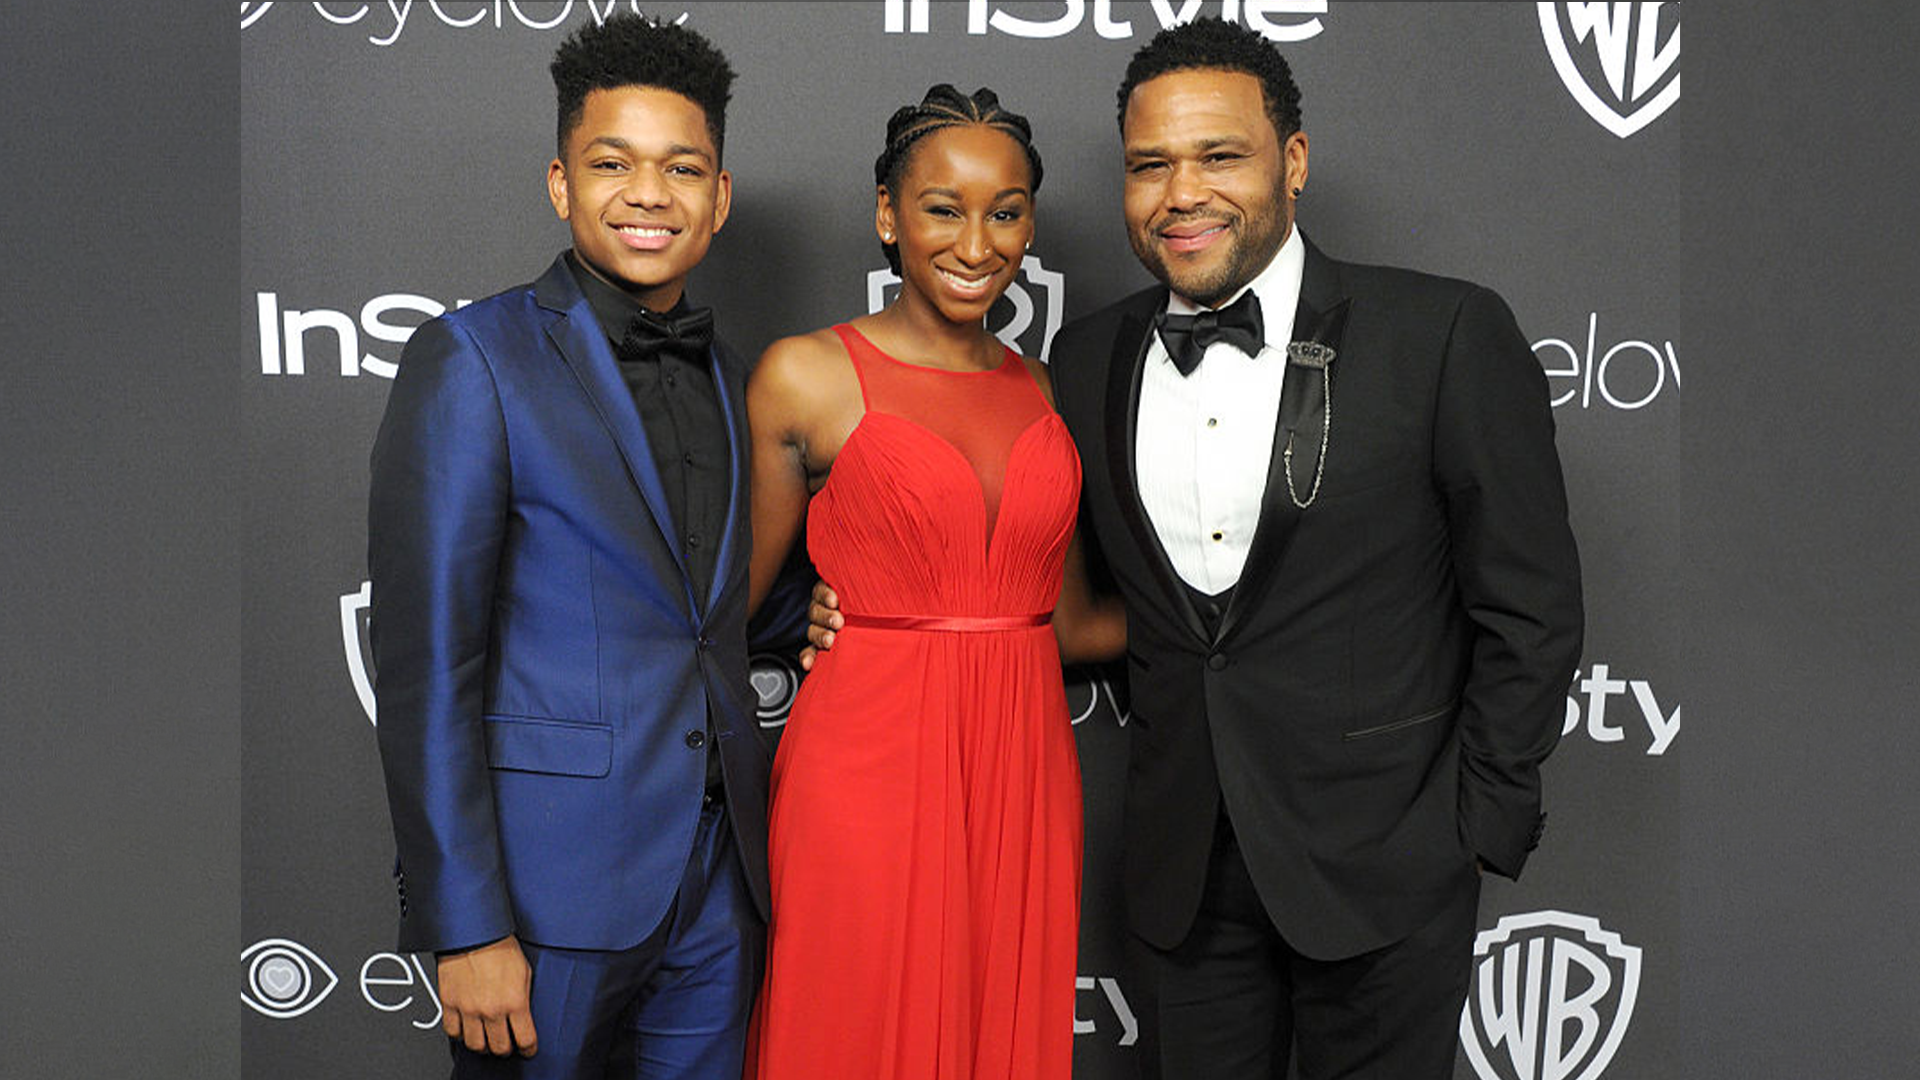 Anthony Anderson's Son Inspires Him To Finish His Studies At Howard While His Daughter Sets Her Own Path